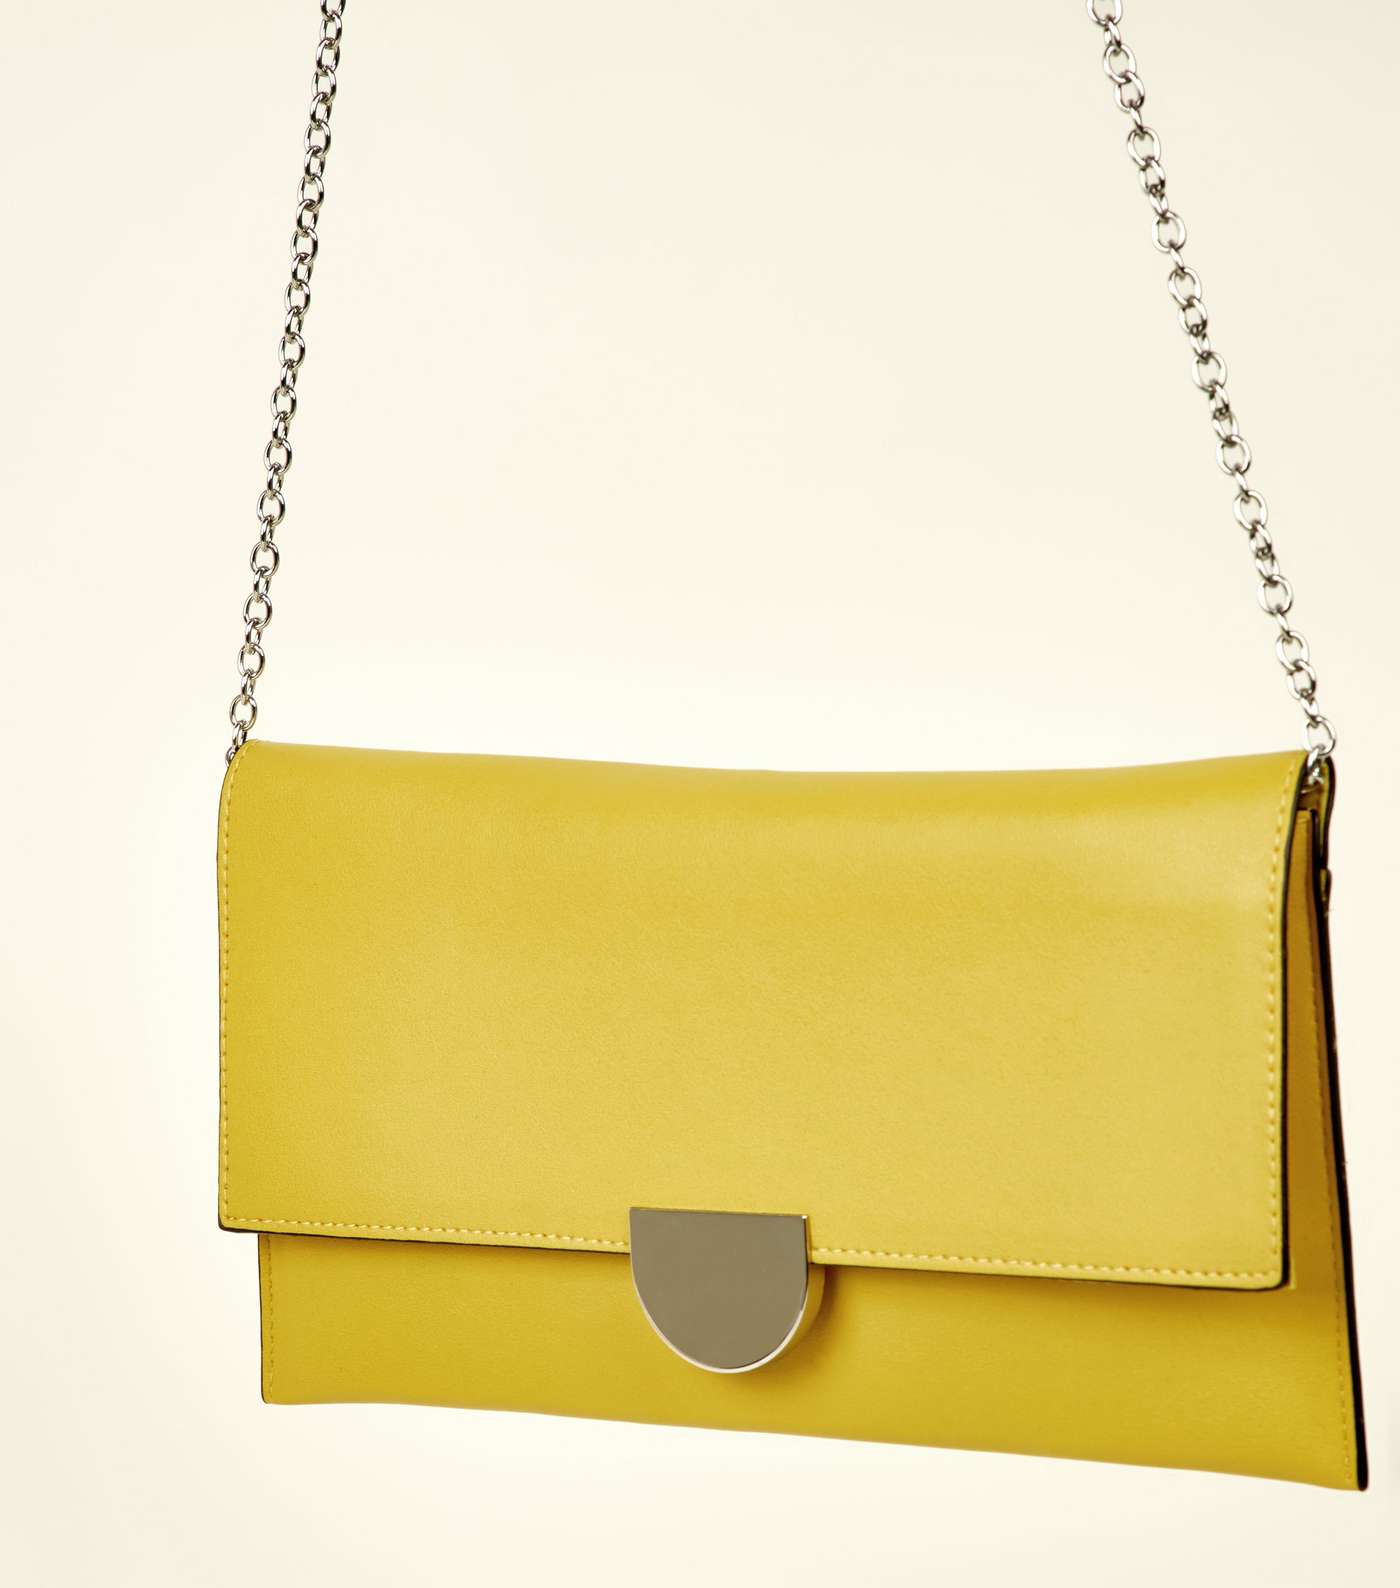 Bright Yellow Leather-Look Clutch Bag  Image 3